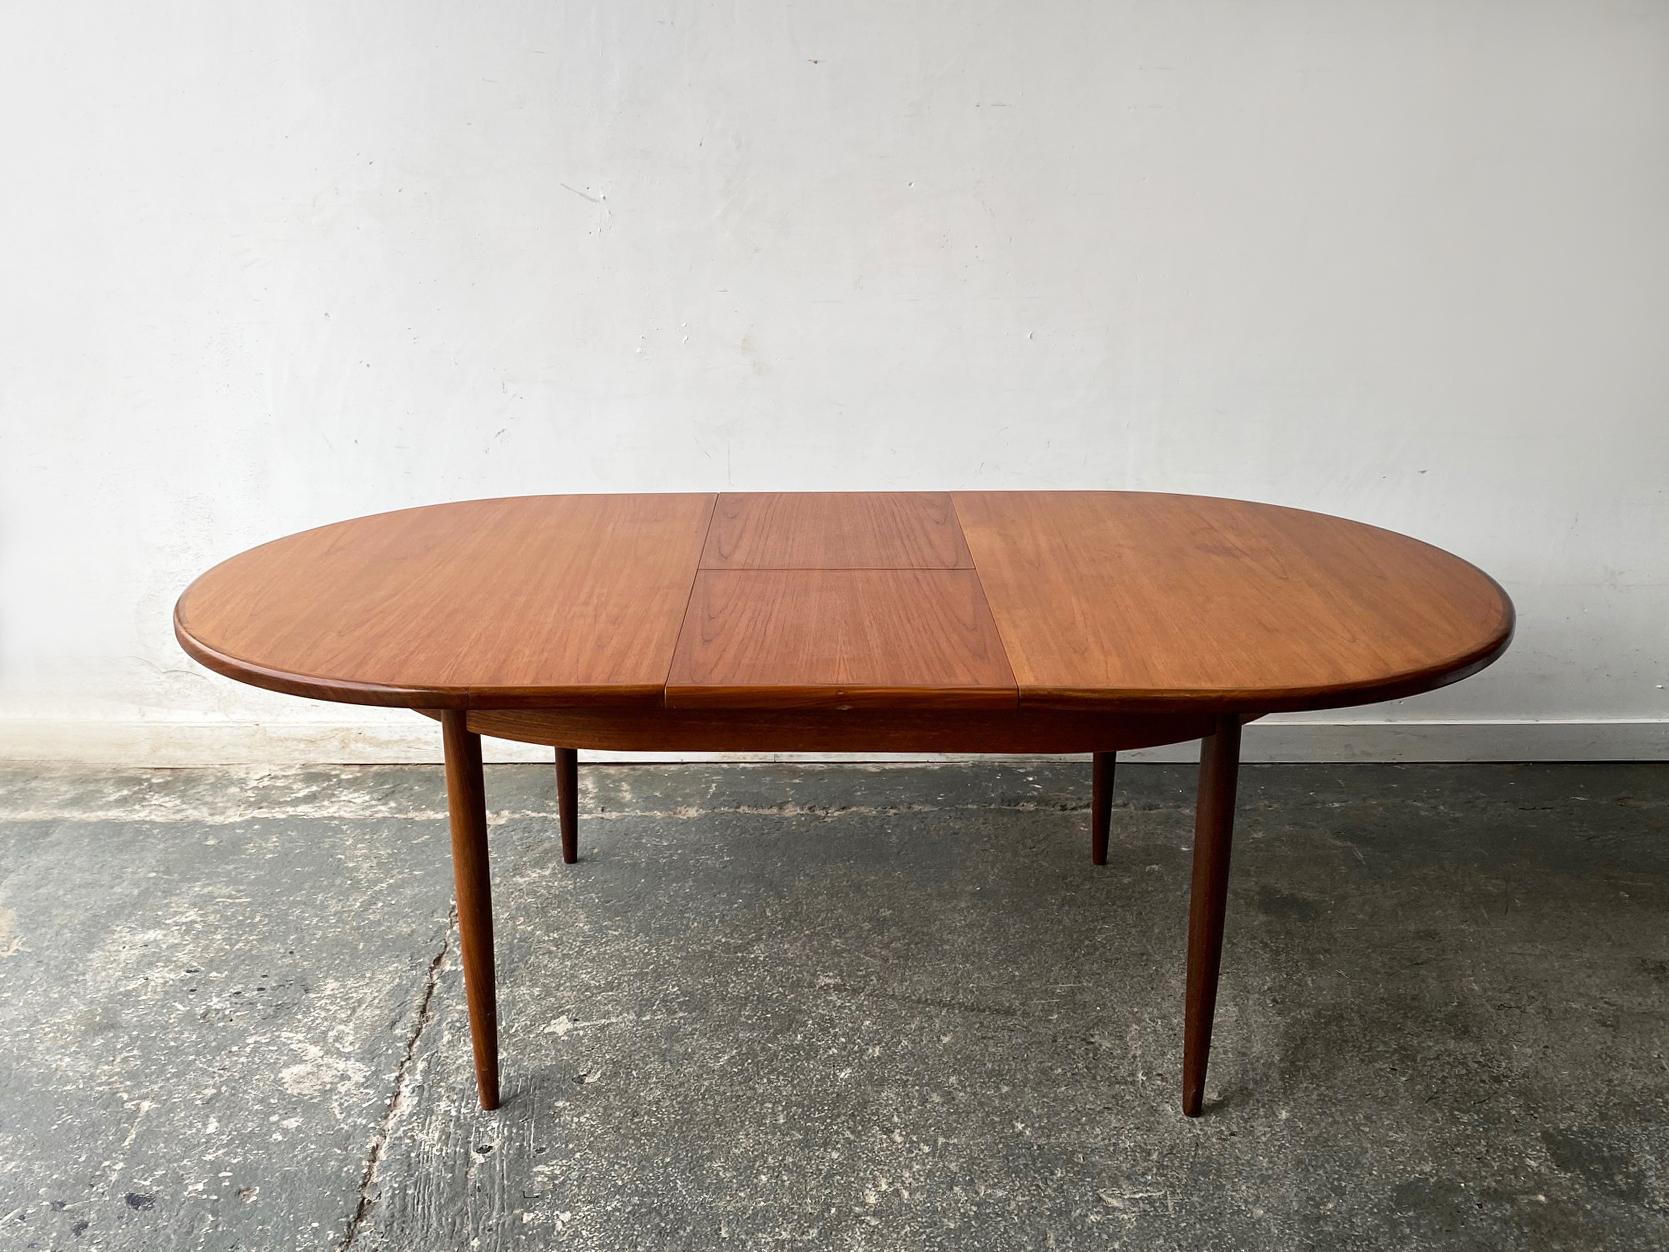 A classic G Plan extending dining table designed by Victor Wilkins. Designed in minimalist Danish style, with clean lines and gently tapering legs.

Size 
Width extended 210cm
Width unextended 120cm 
Depth 112cm
Feight 74cm

Condition:
Very good mid